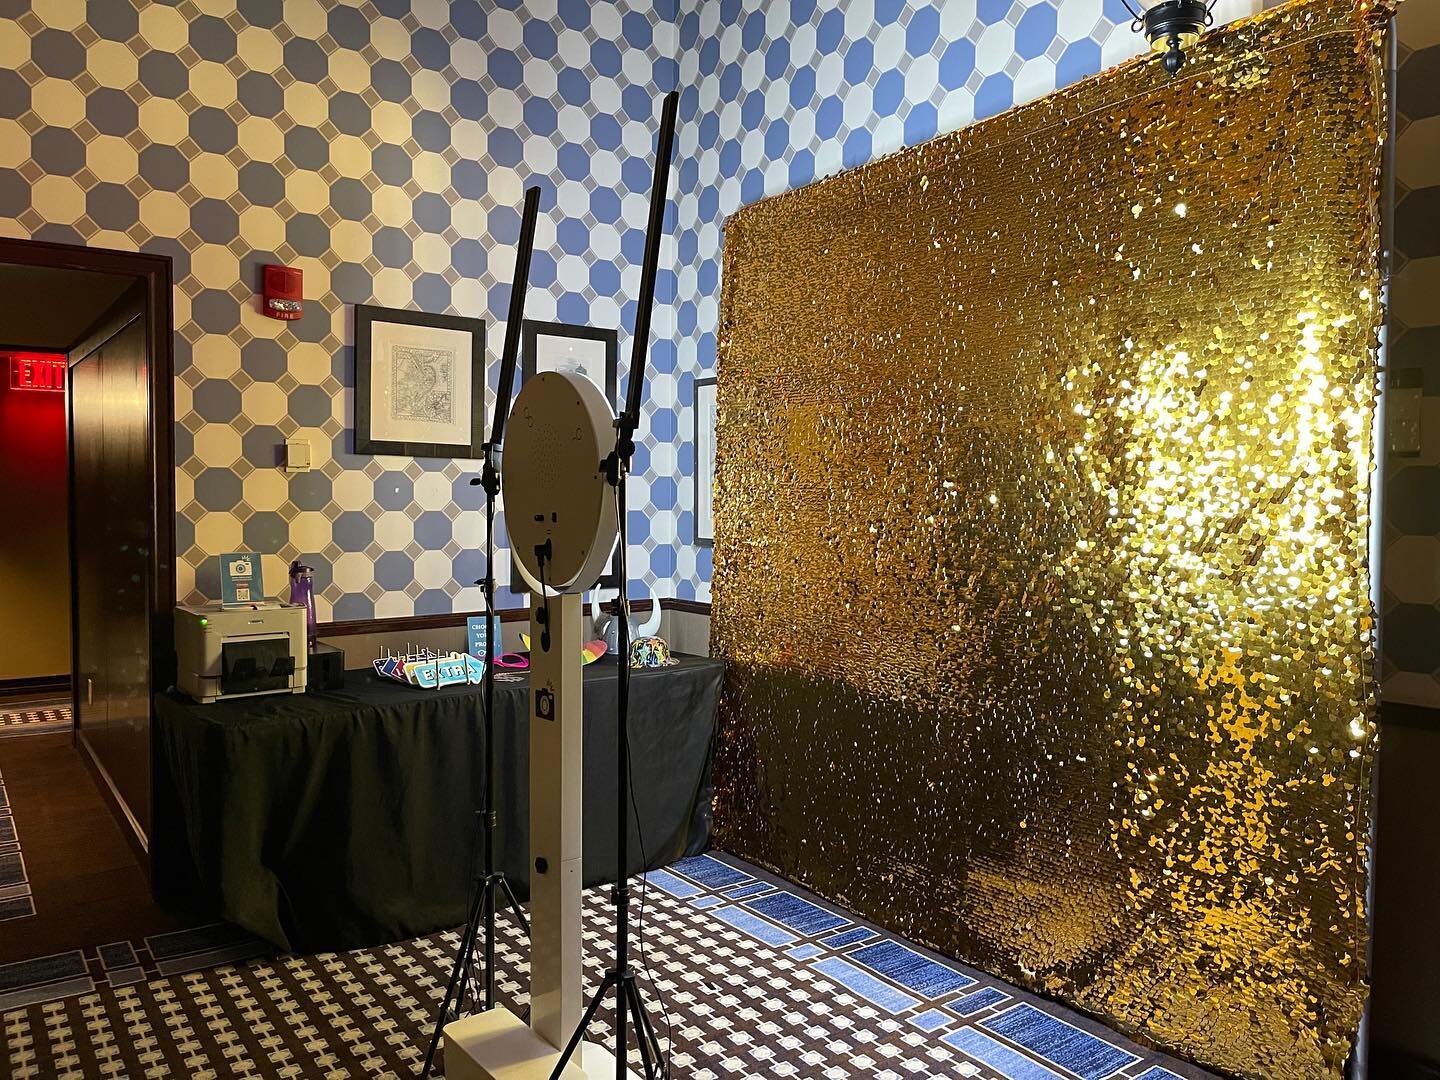 Our Gold Sequin wall is great for birthdays and special events! Reach out to see our other colors!